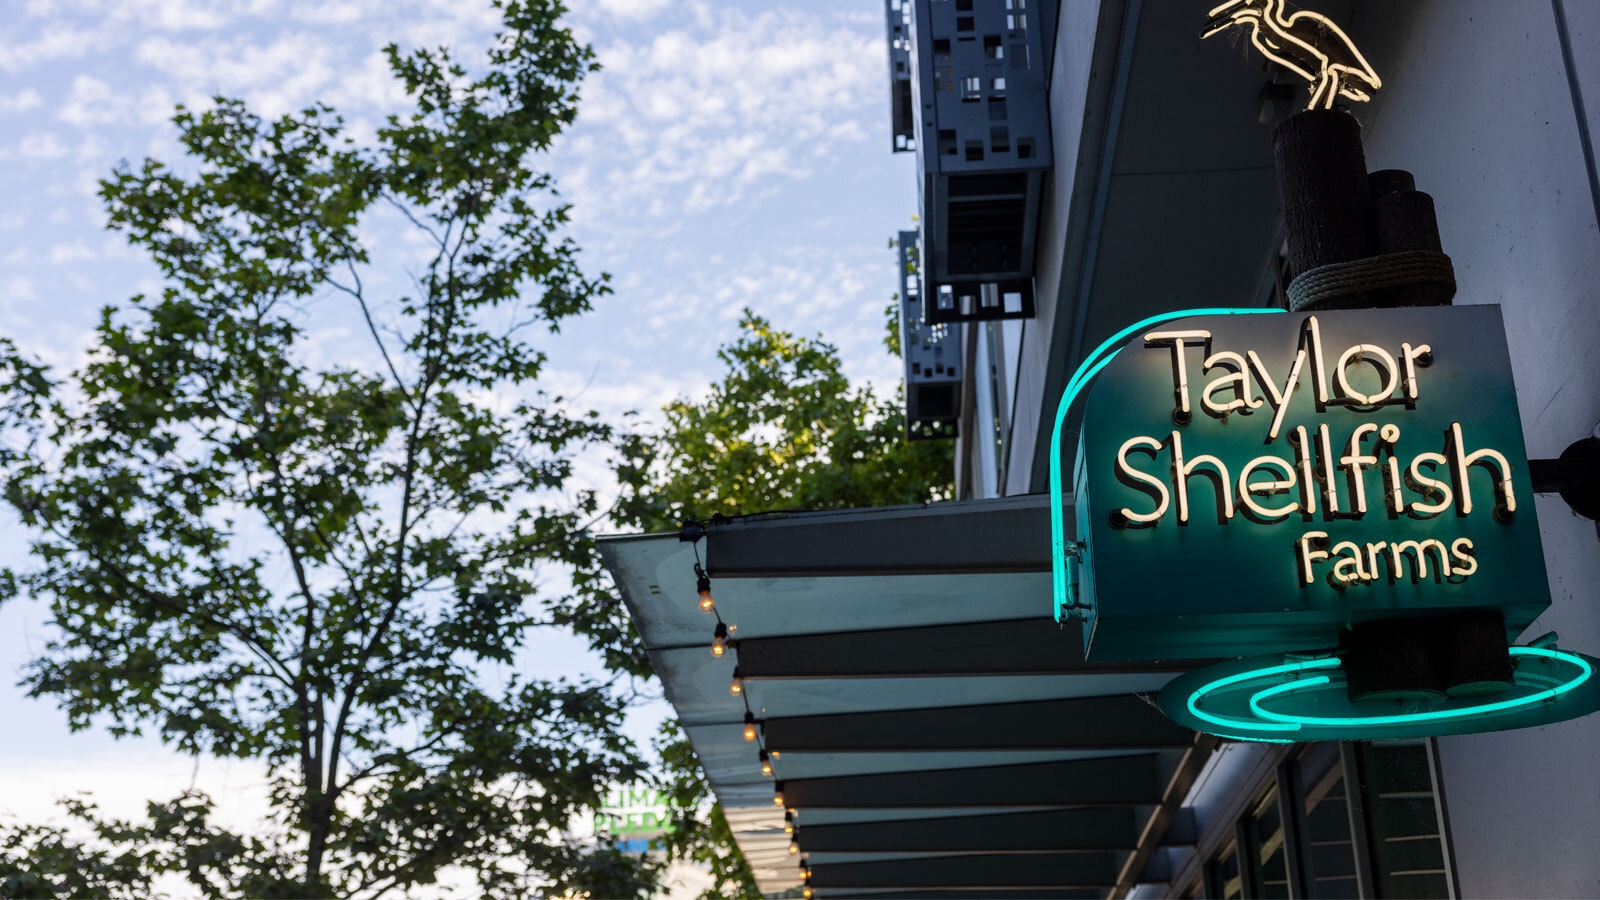 An image of the outside of the restaurant for Taylor Shellfish Farms near Climate Pledge Arena in Seattle.